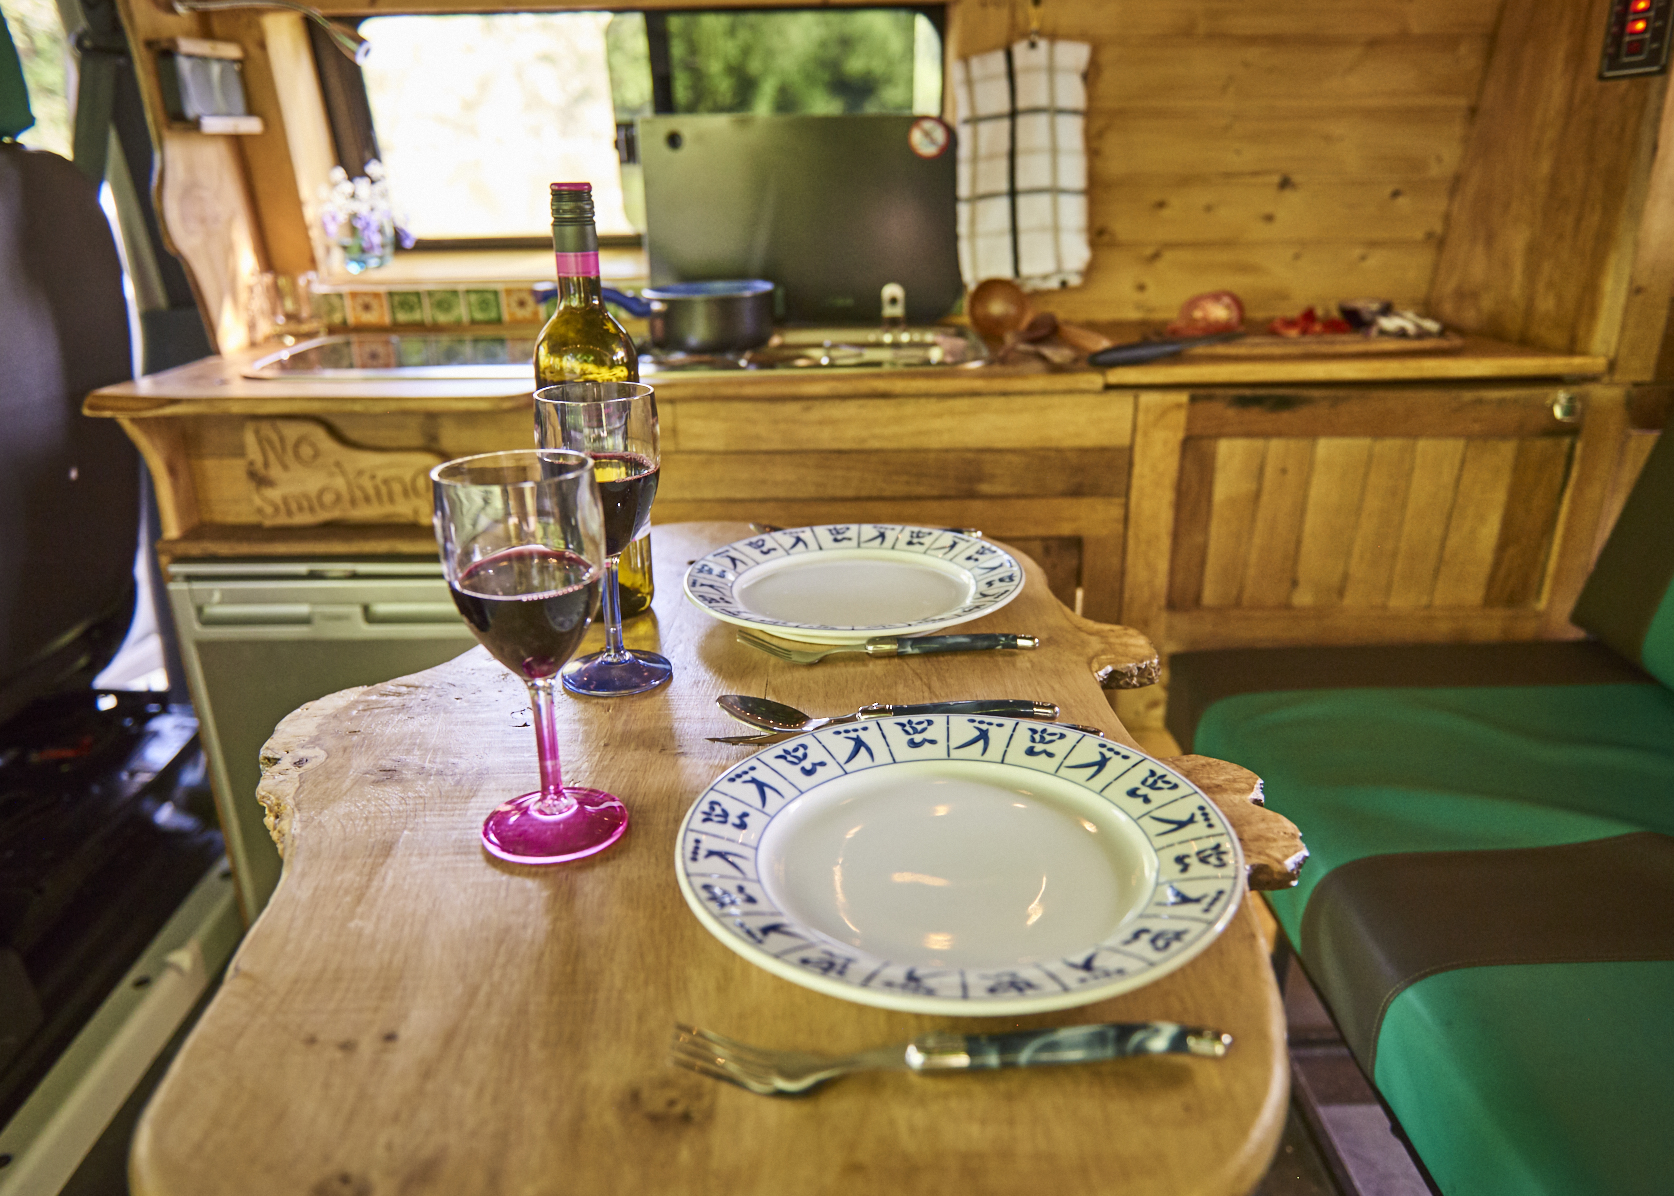 A cozy dining setup inside a camper van with a wooden table set for two. The table features two plates, utensils, and two glasses of red wine. The kitchen area in the background includes a counter with cooking utensils, a bottle of wine, and a 